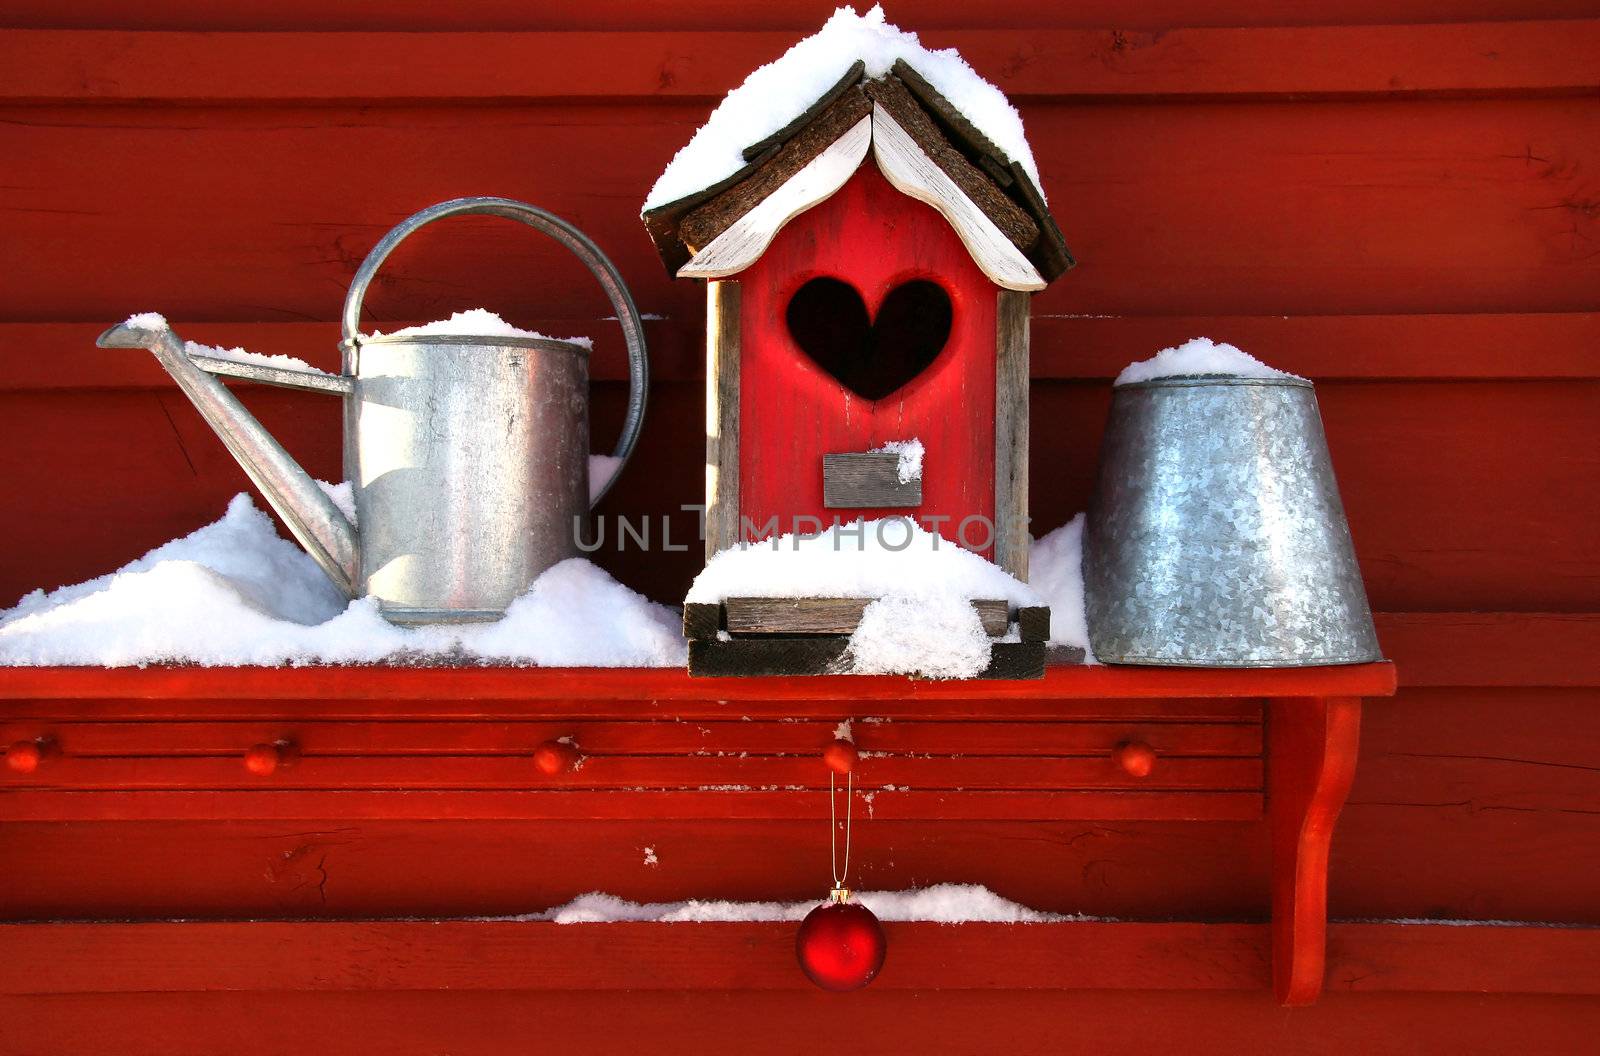 Old red birdhouse on shelf in the snow